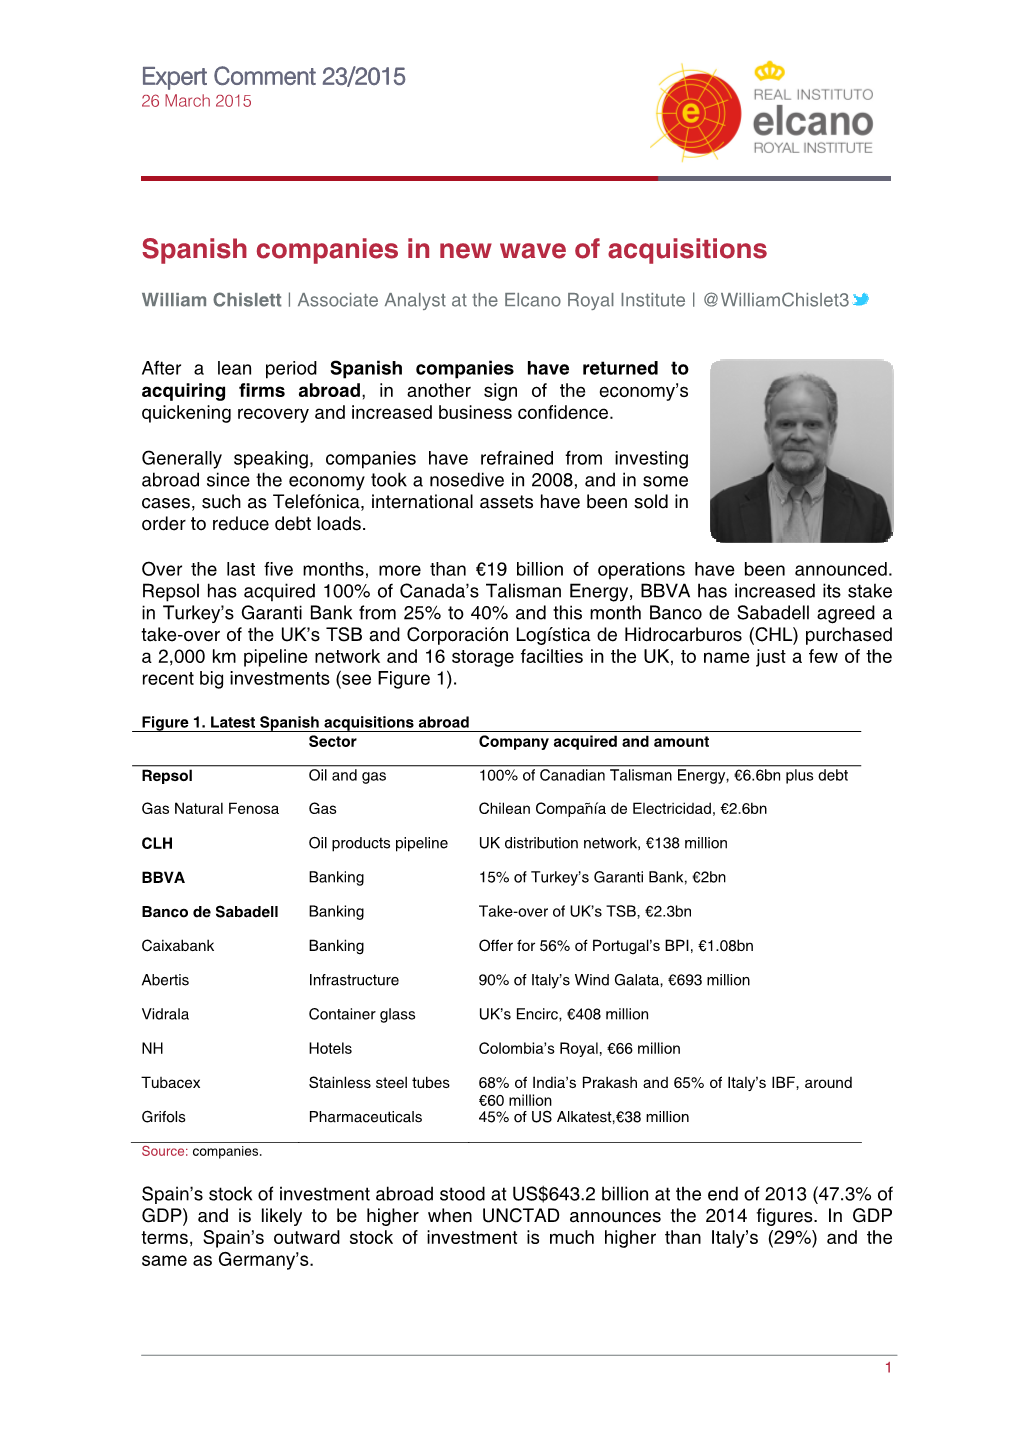 Spanish Companies in New Wave of Acquisitions